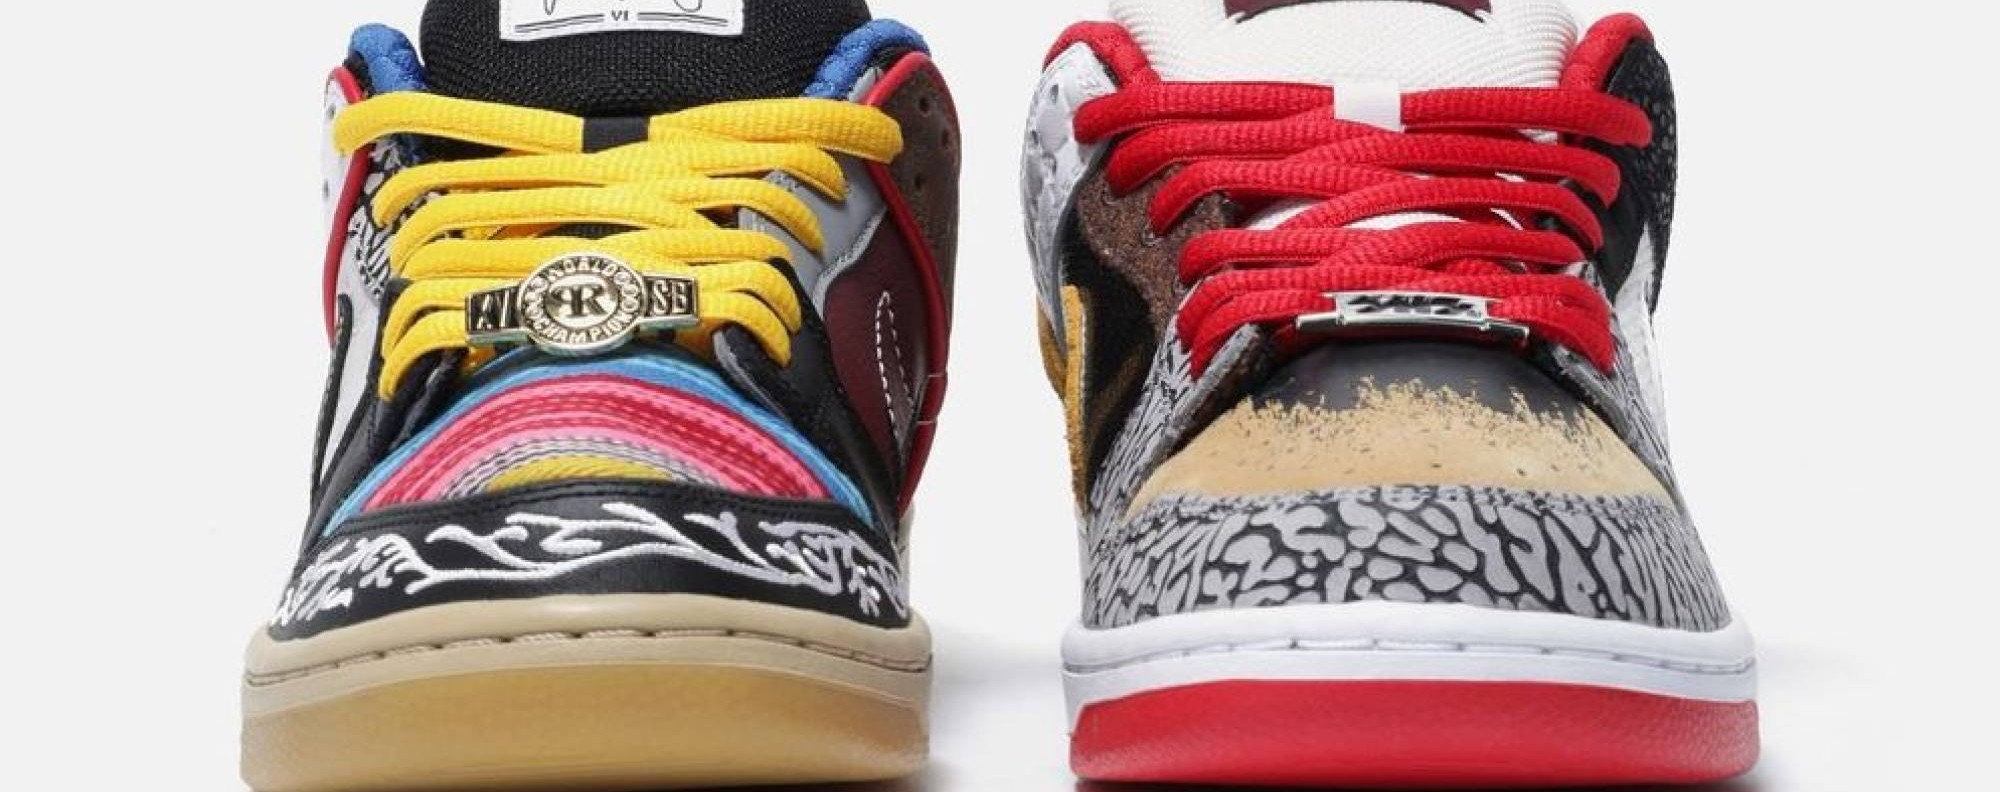 GOAT to Auction Off Rare Sneakers During Black Friday Shopping